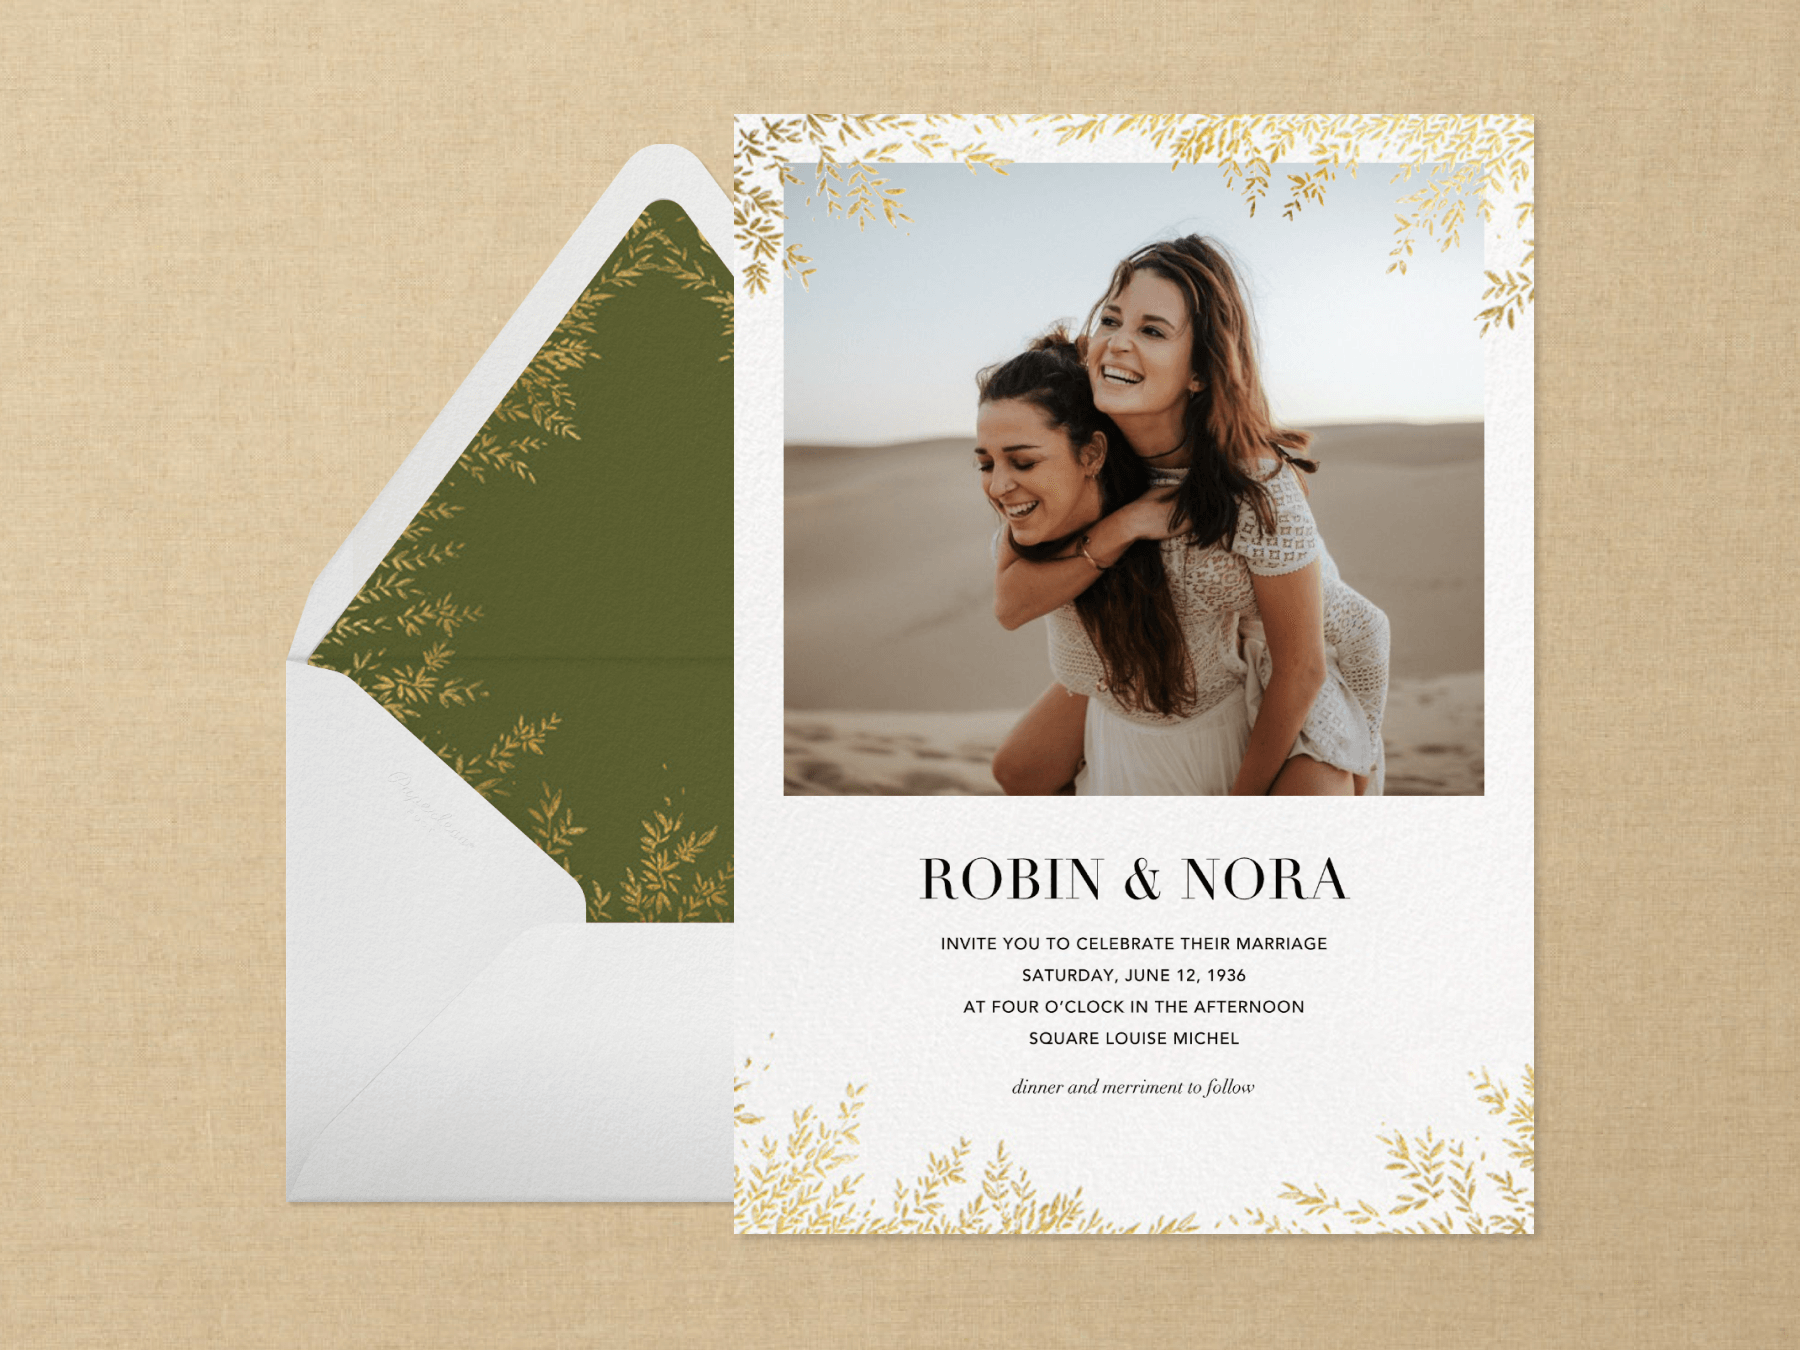 A white wedding invitation with a photo of a smiling couple piggybacking in the desert with gold leaves creeping in on the top and bottom beside a white envelope with green and gold leaf liner on a neutral textured background.